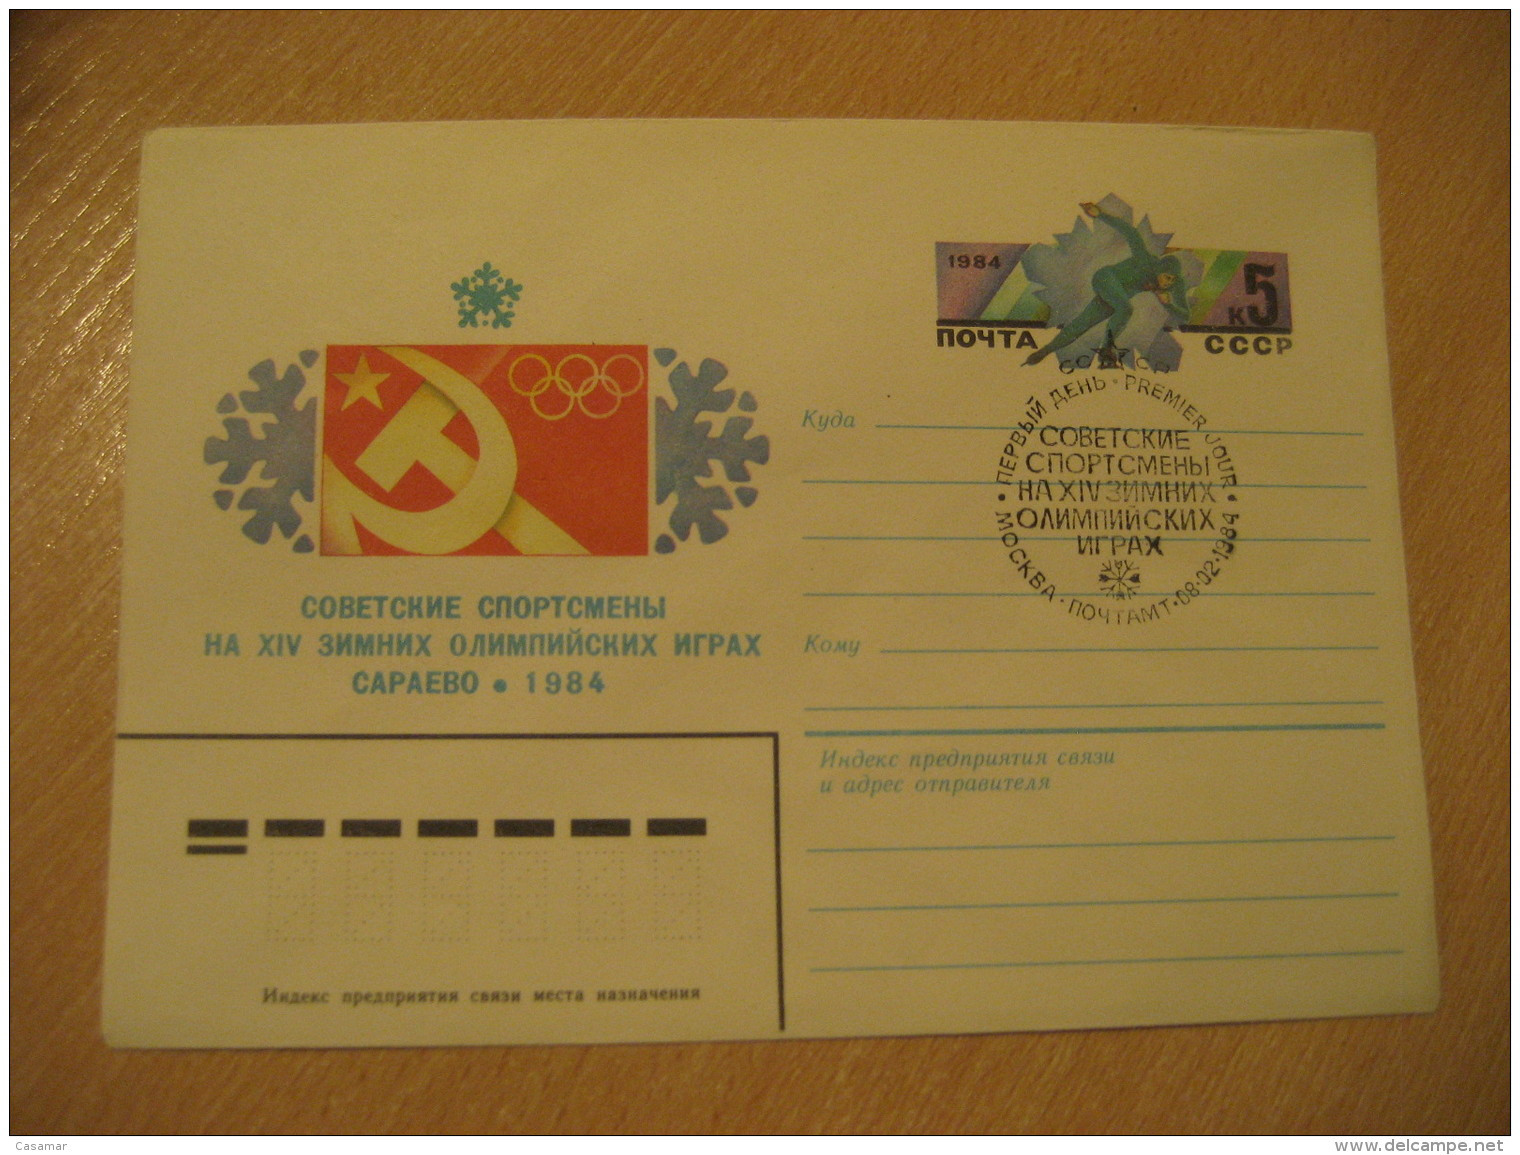 RUSSIA 1984 Olympic Games Olympics Speed Skating On Ice Patinage De Vitesse Sur Glace Postal Stationery Cover USSR CCCP - Pattinaggio Artistico